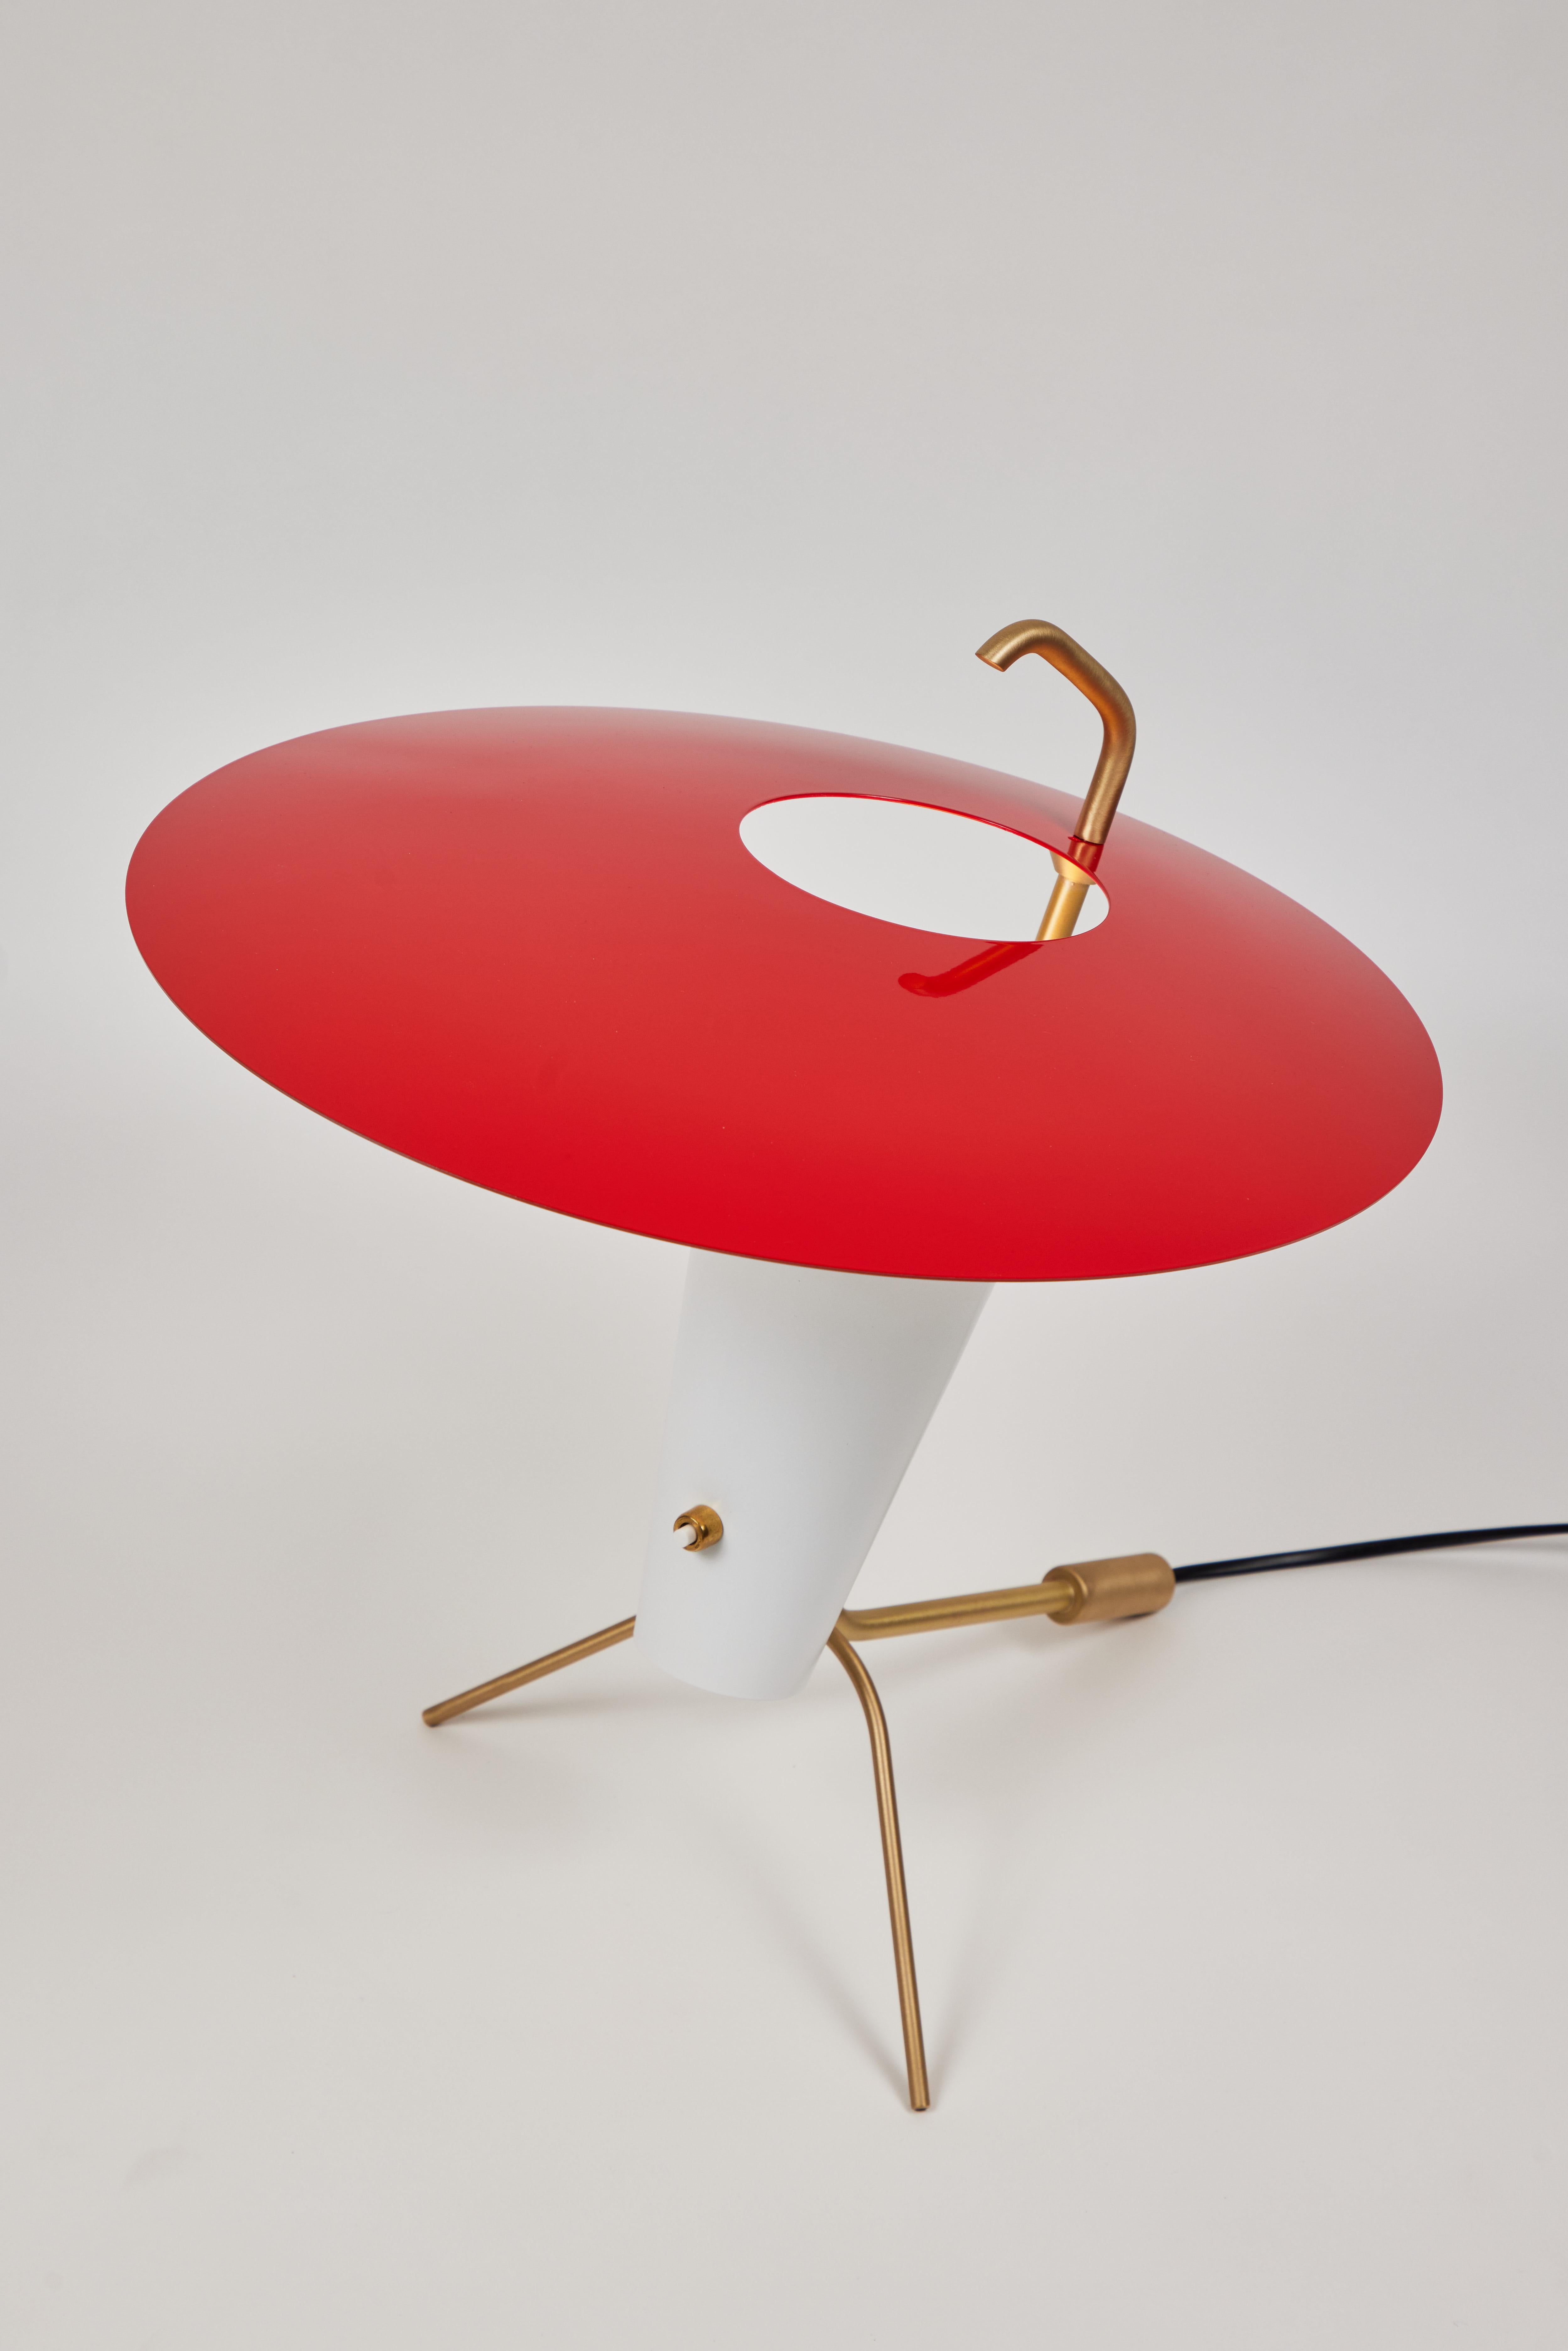 Pierre Guariche G24 Table Lamp in Red and White for Sammode Studio In New Condition For Sale In Glendale, CA